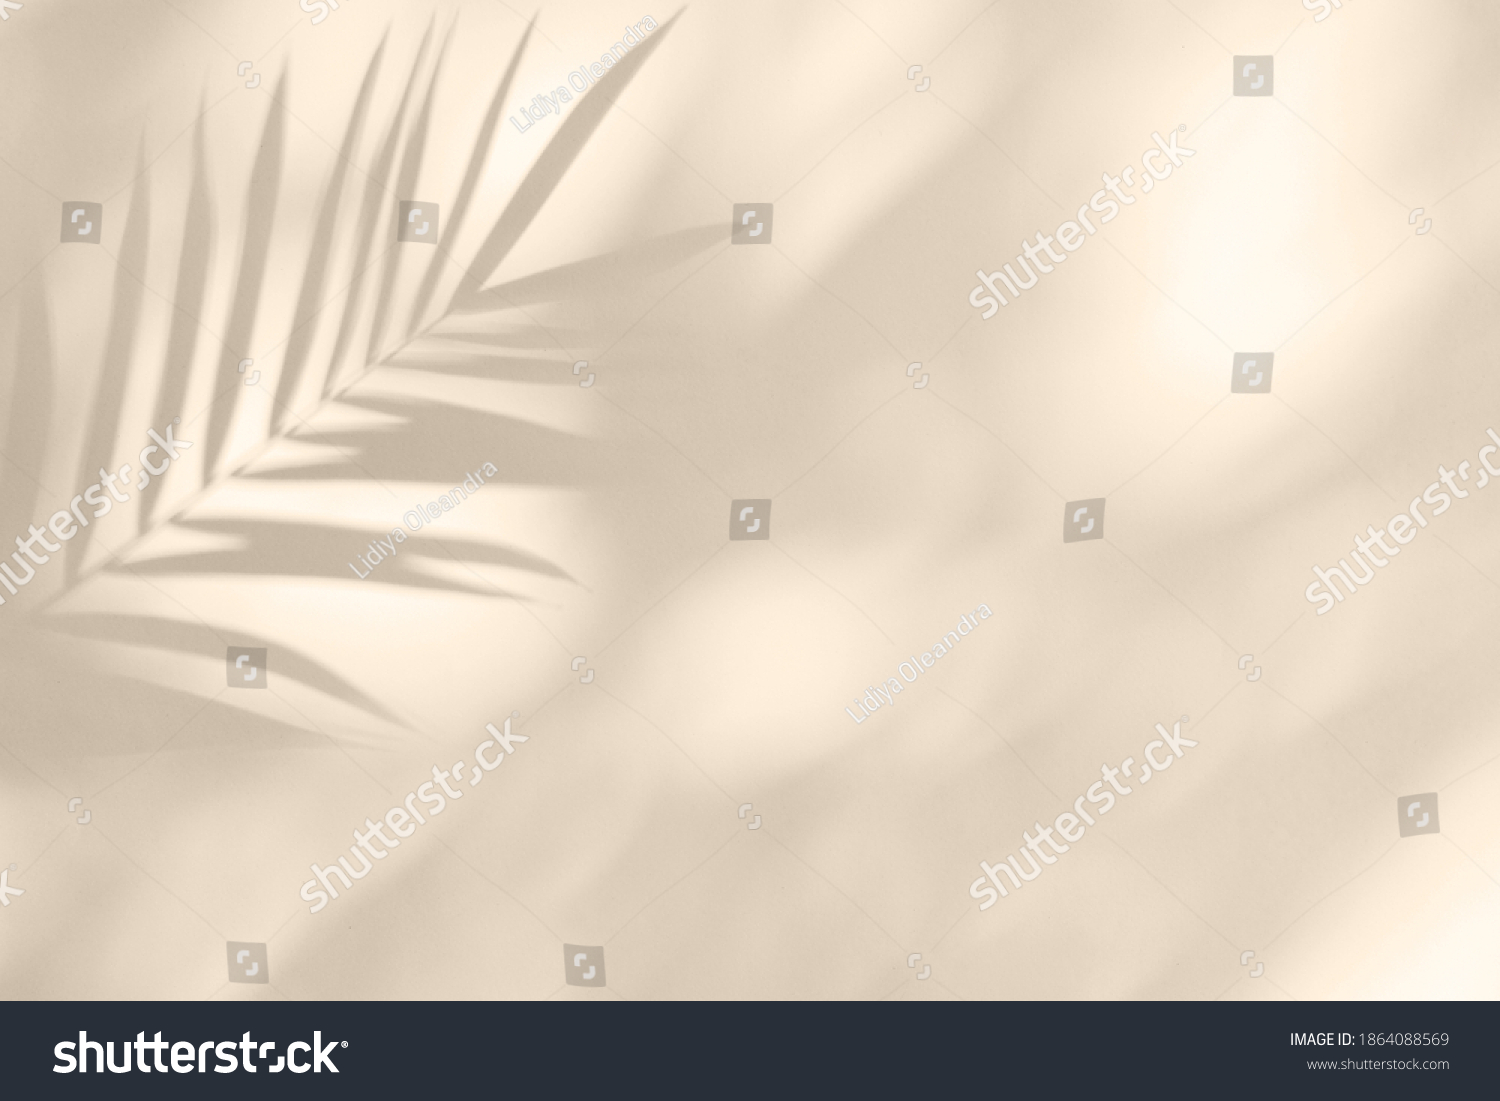 Soft shadows of tropical palm leaves on textured concrete background. Summer travel concept. Abstract minimal photo for advertising. #1864088569